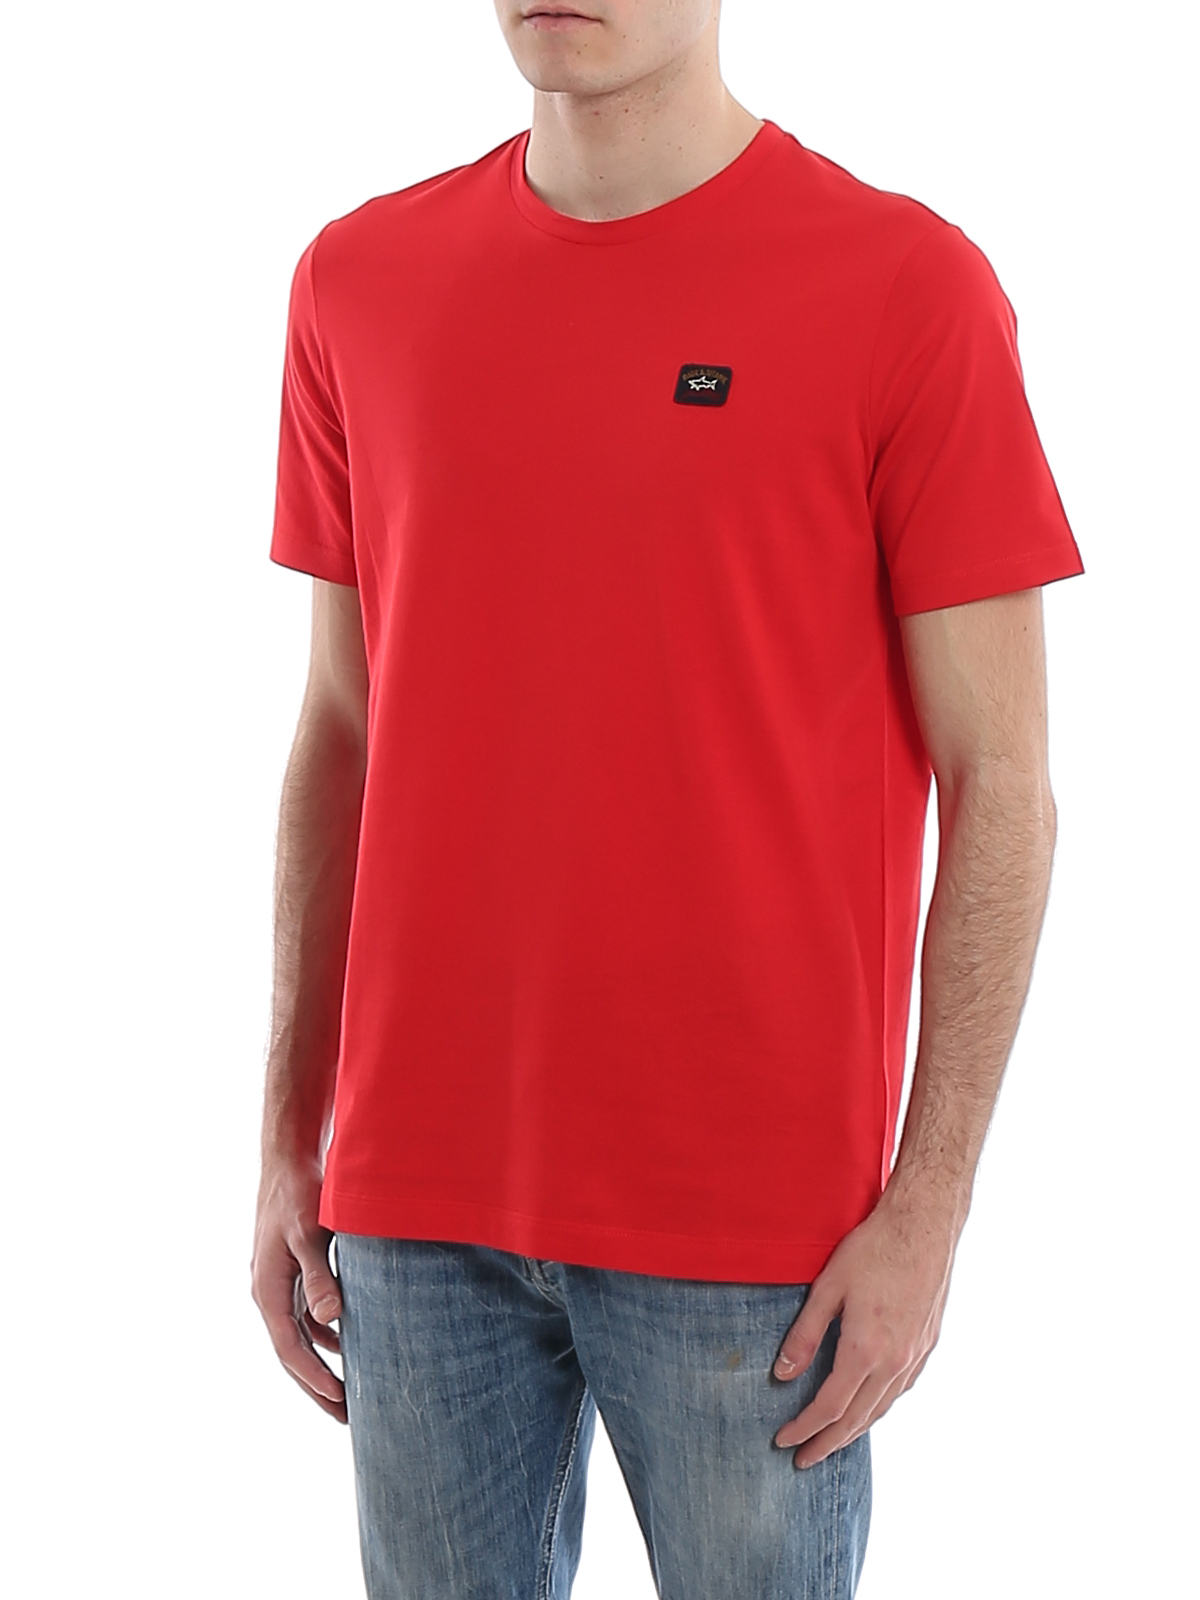 paul and shark red t shirt